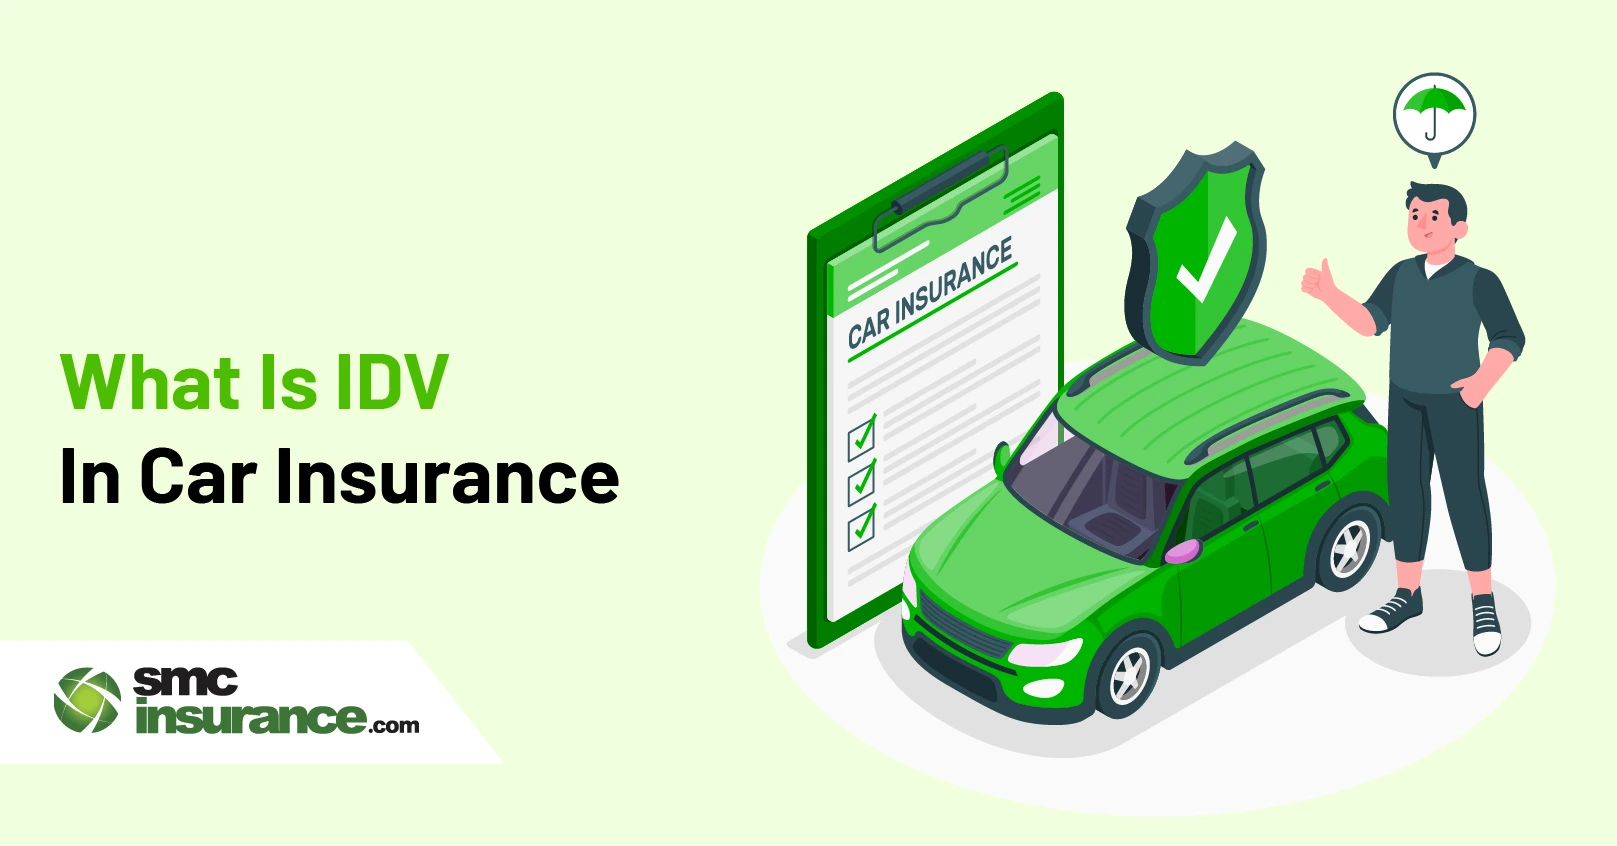 What Is IDV In Car Insurance?